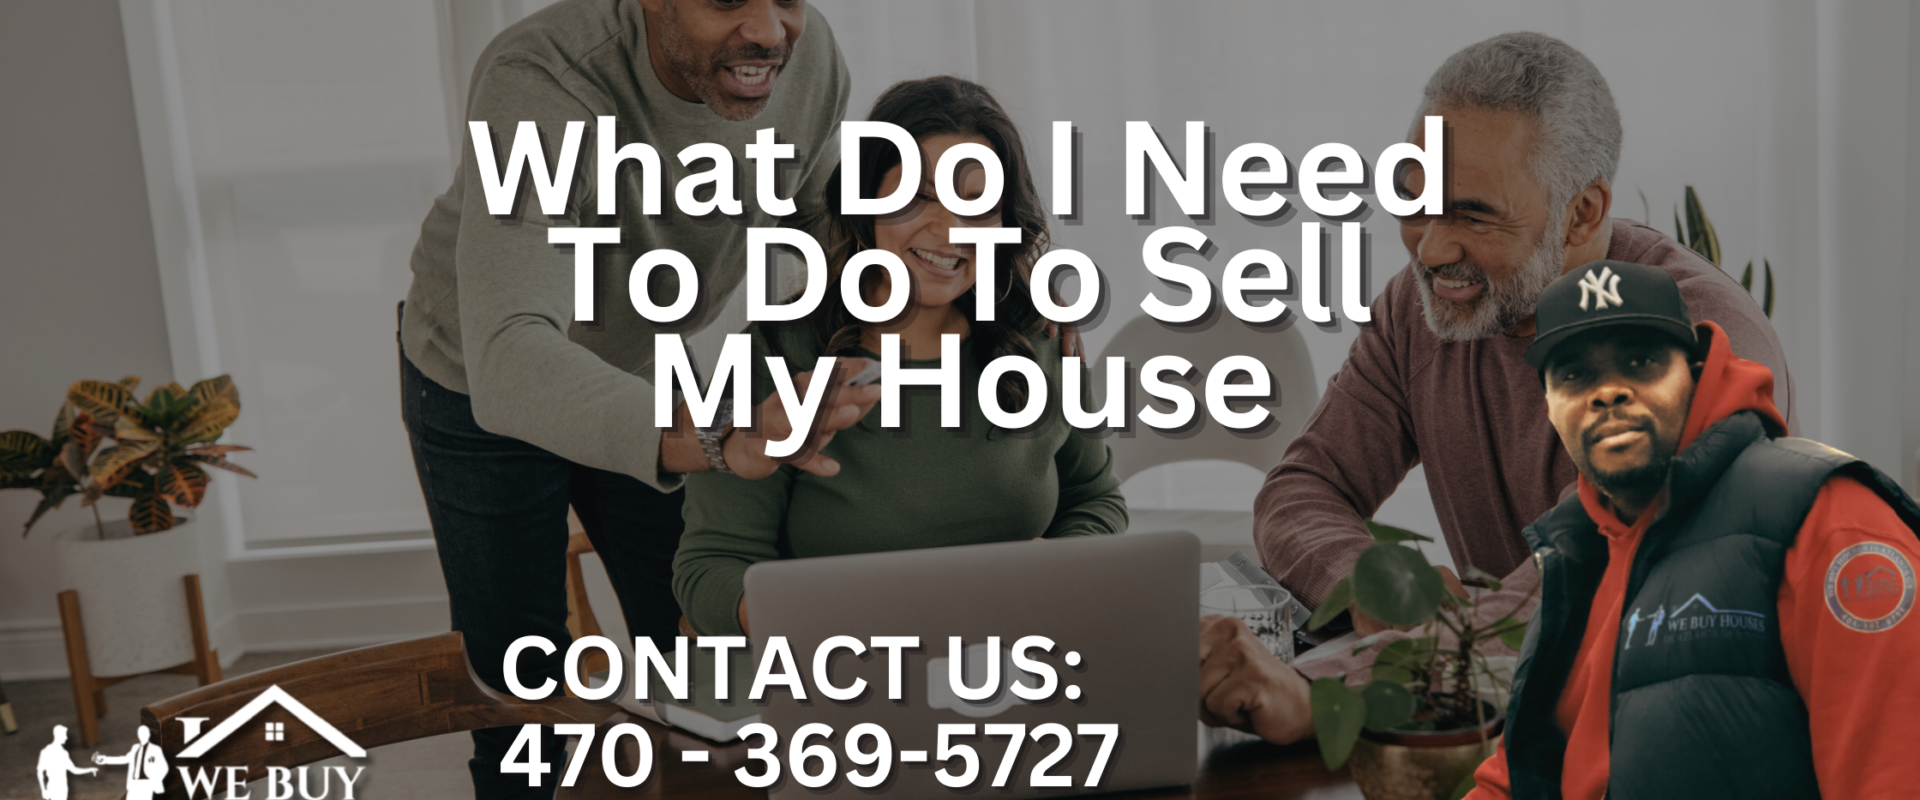 What Do I Need To Do To Sell My House